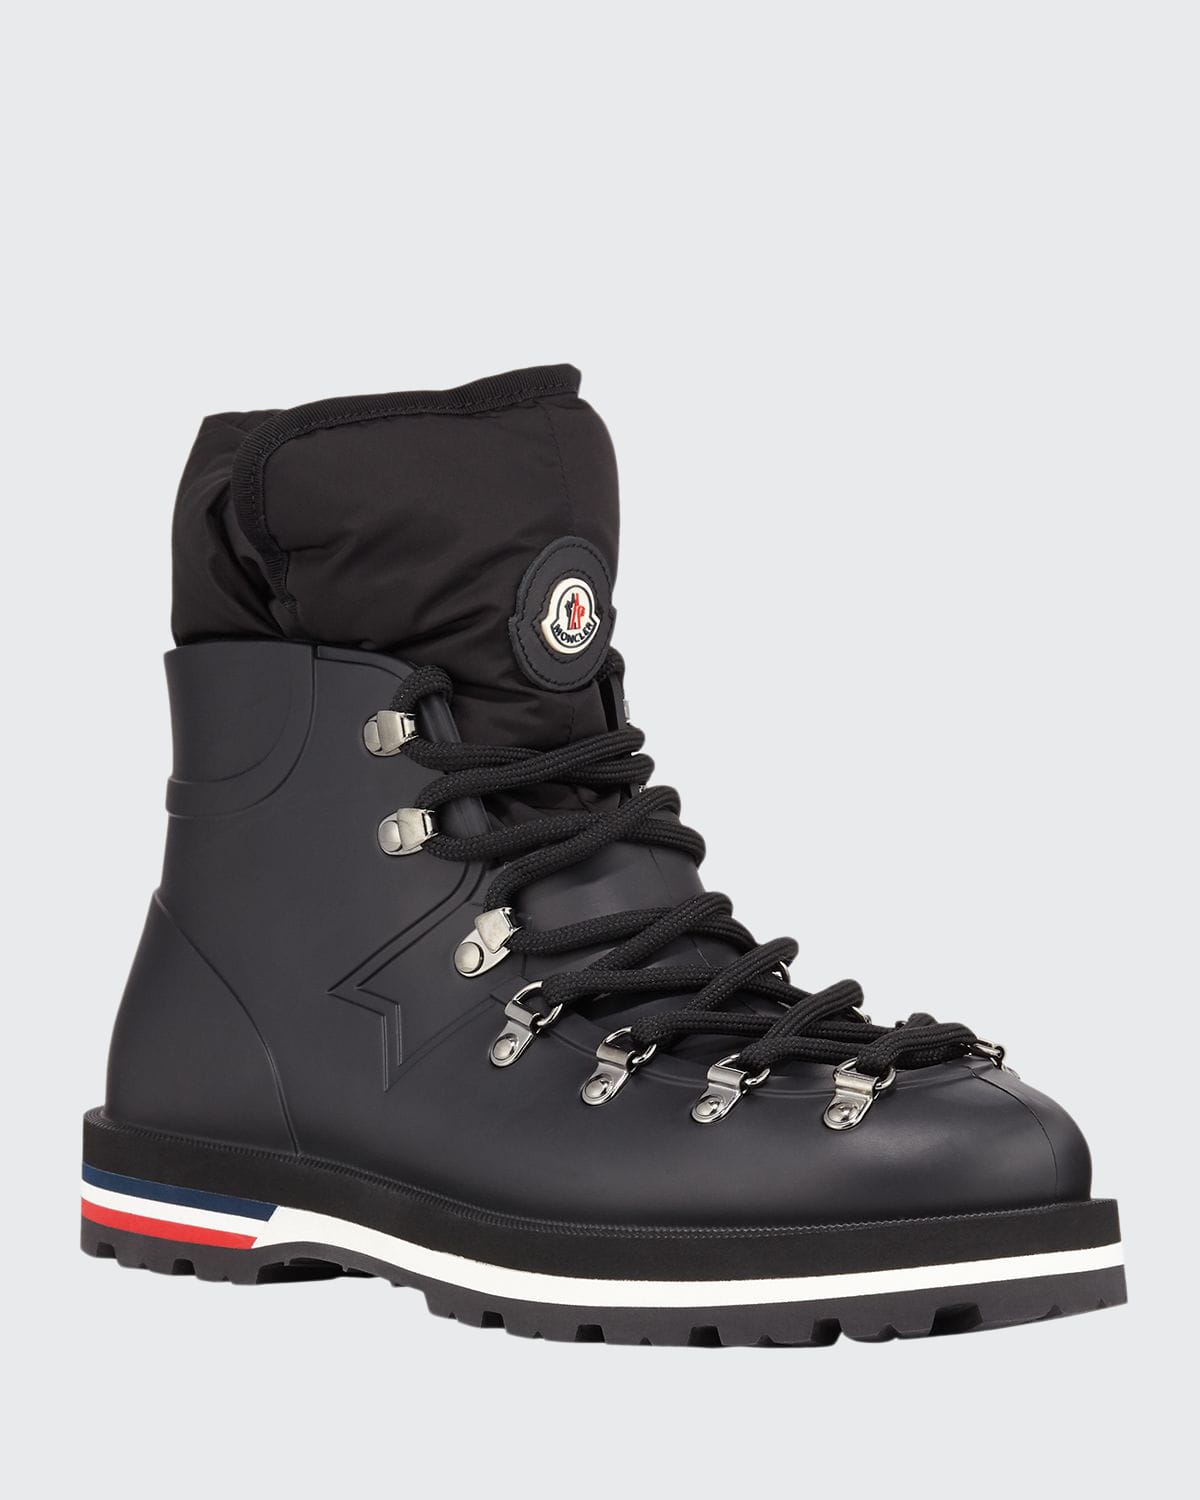 Moncler Inaya Puffer Lined Hiking Boot In Black | ModeSens